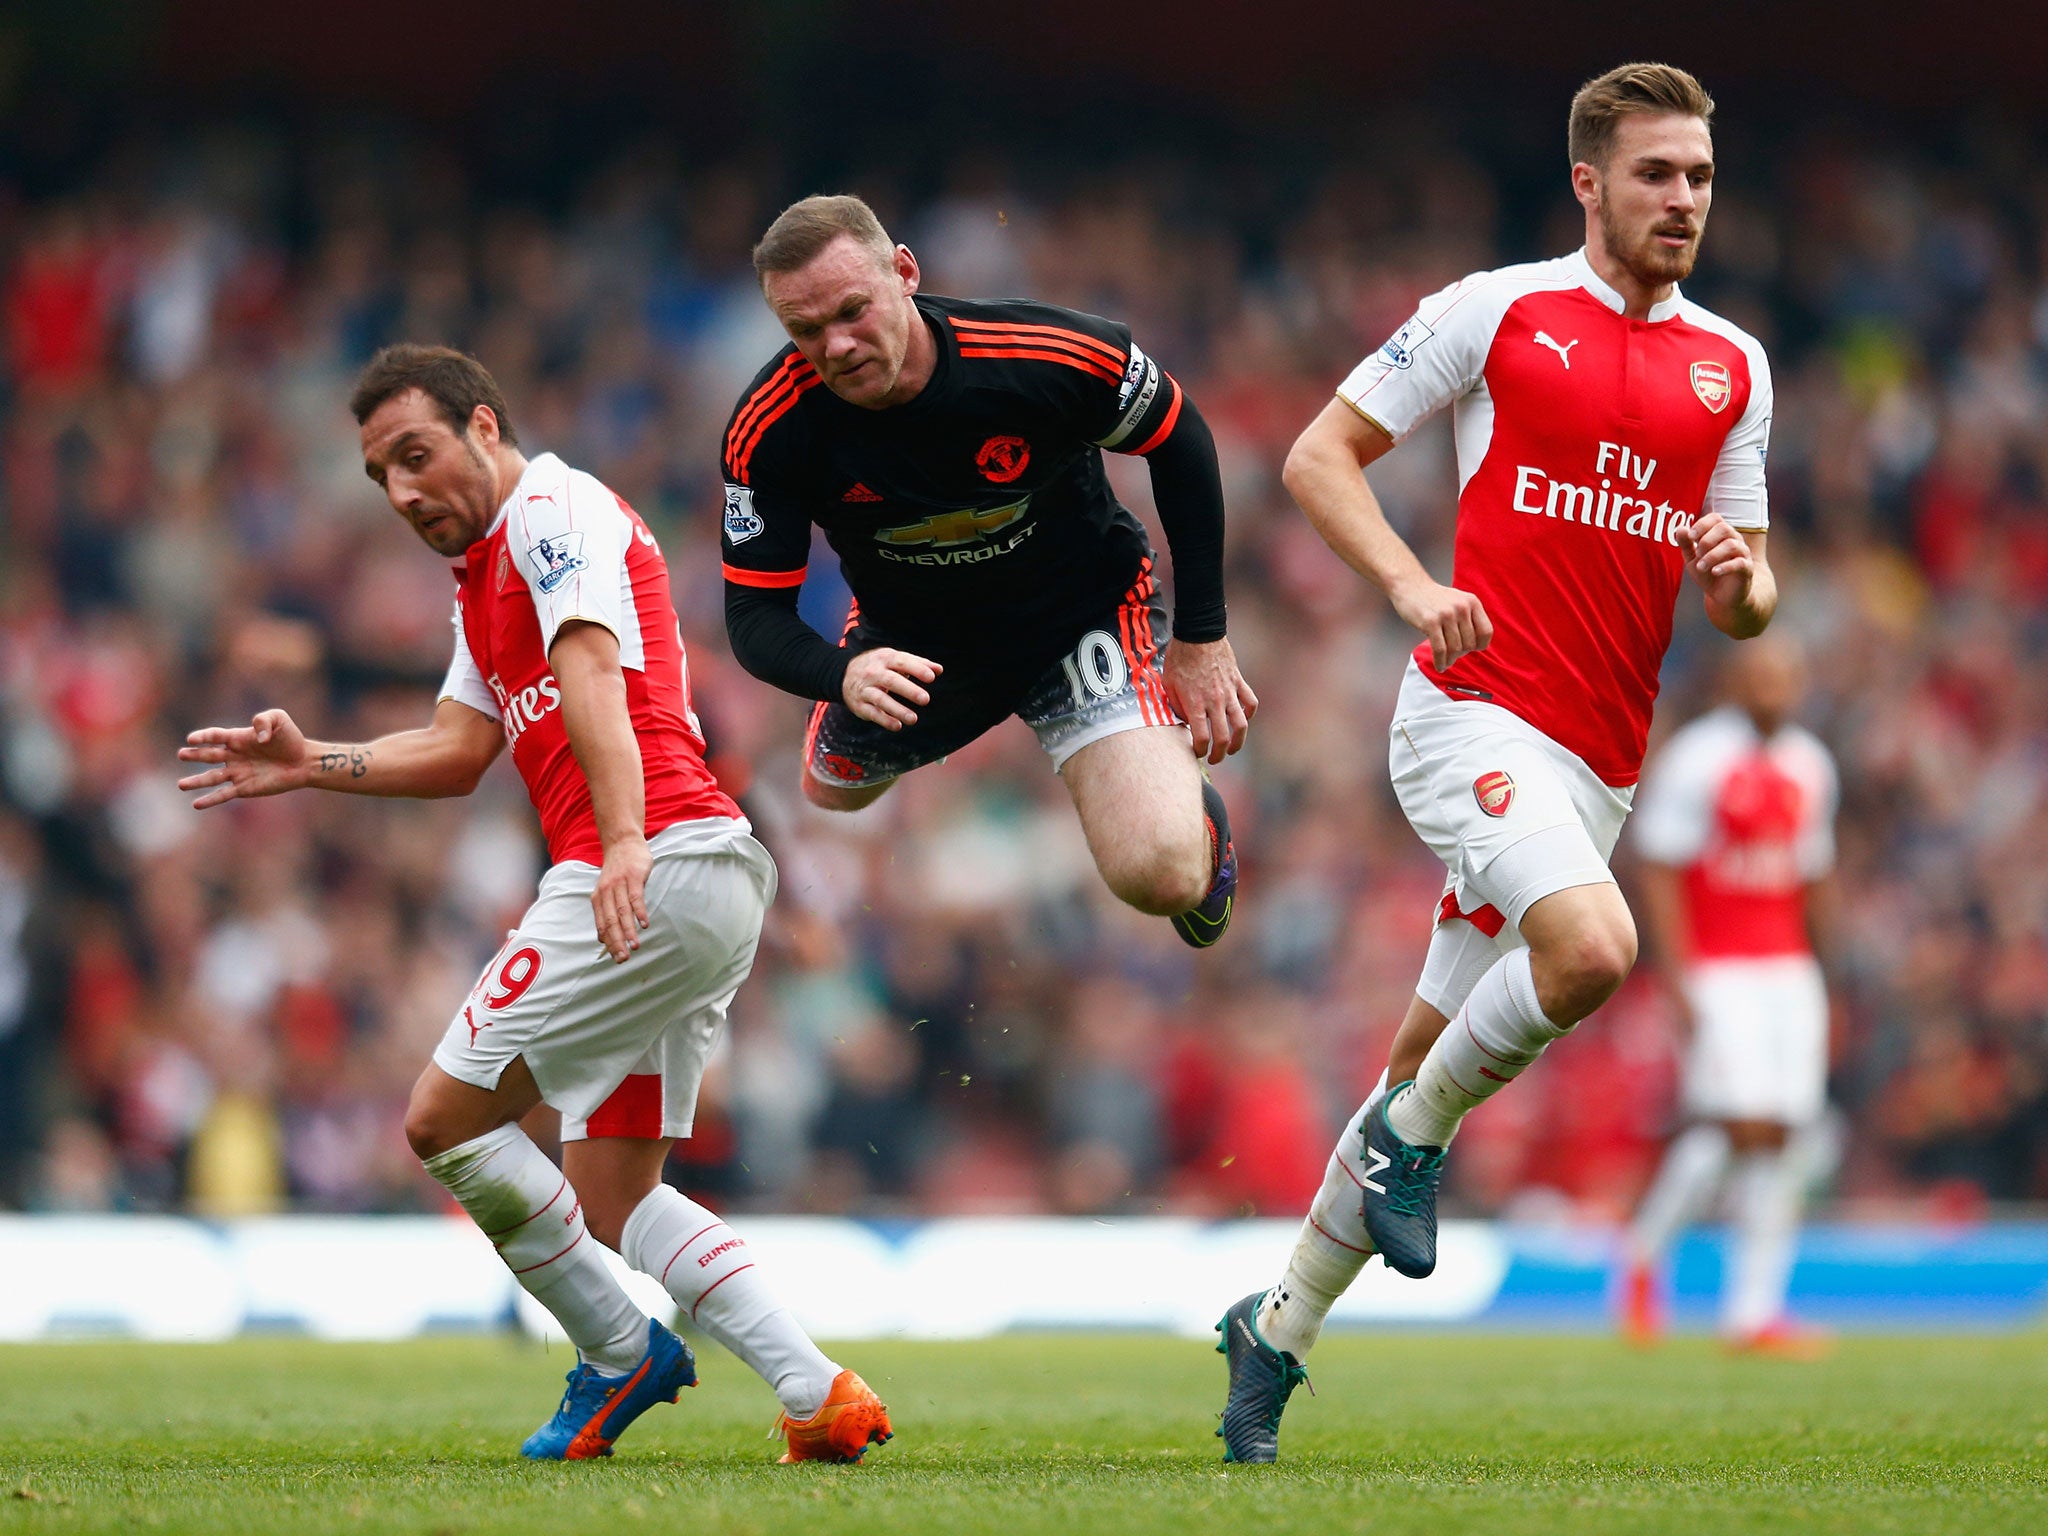 Wayne Rooney in action against Arsenal